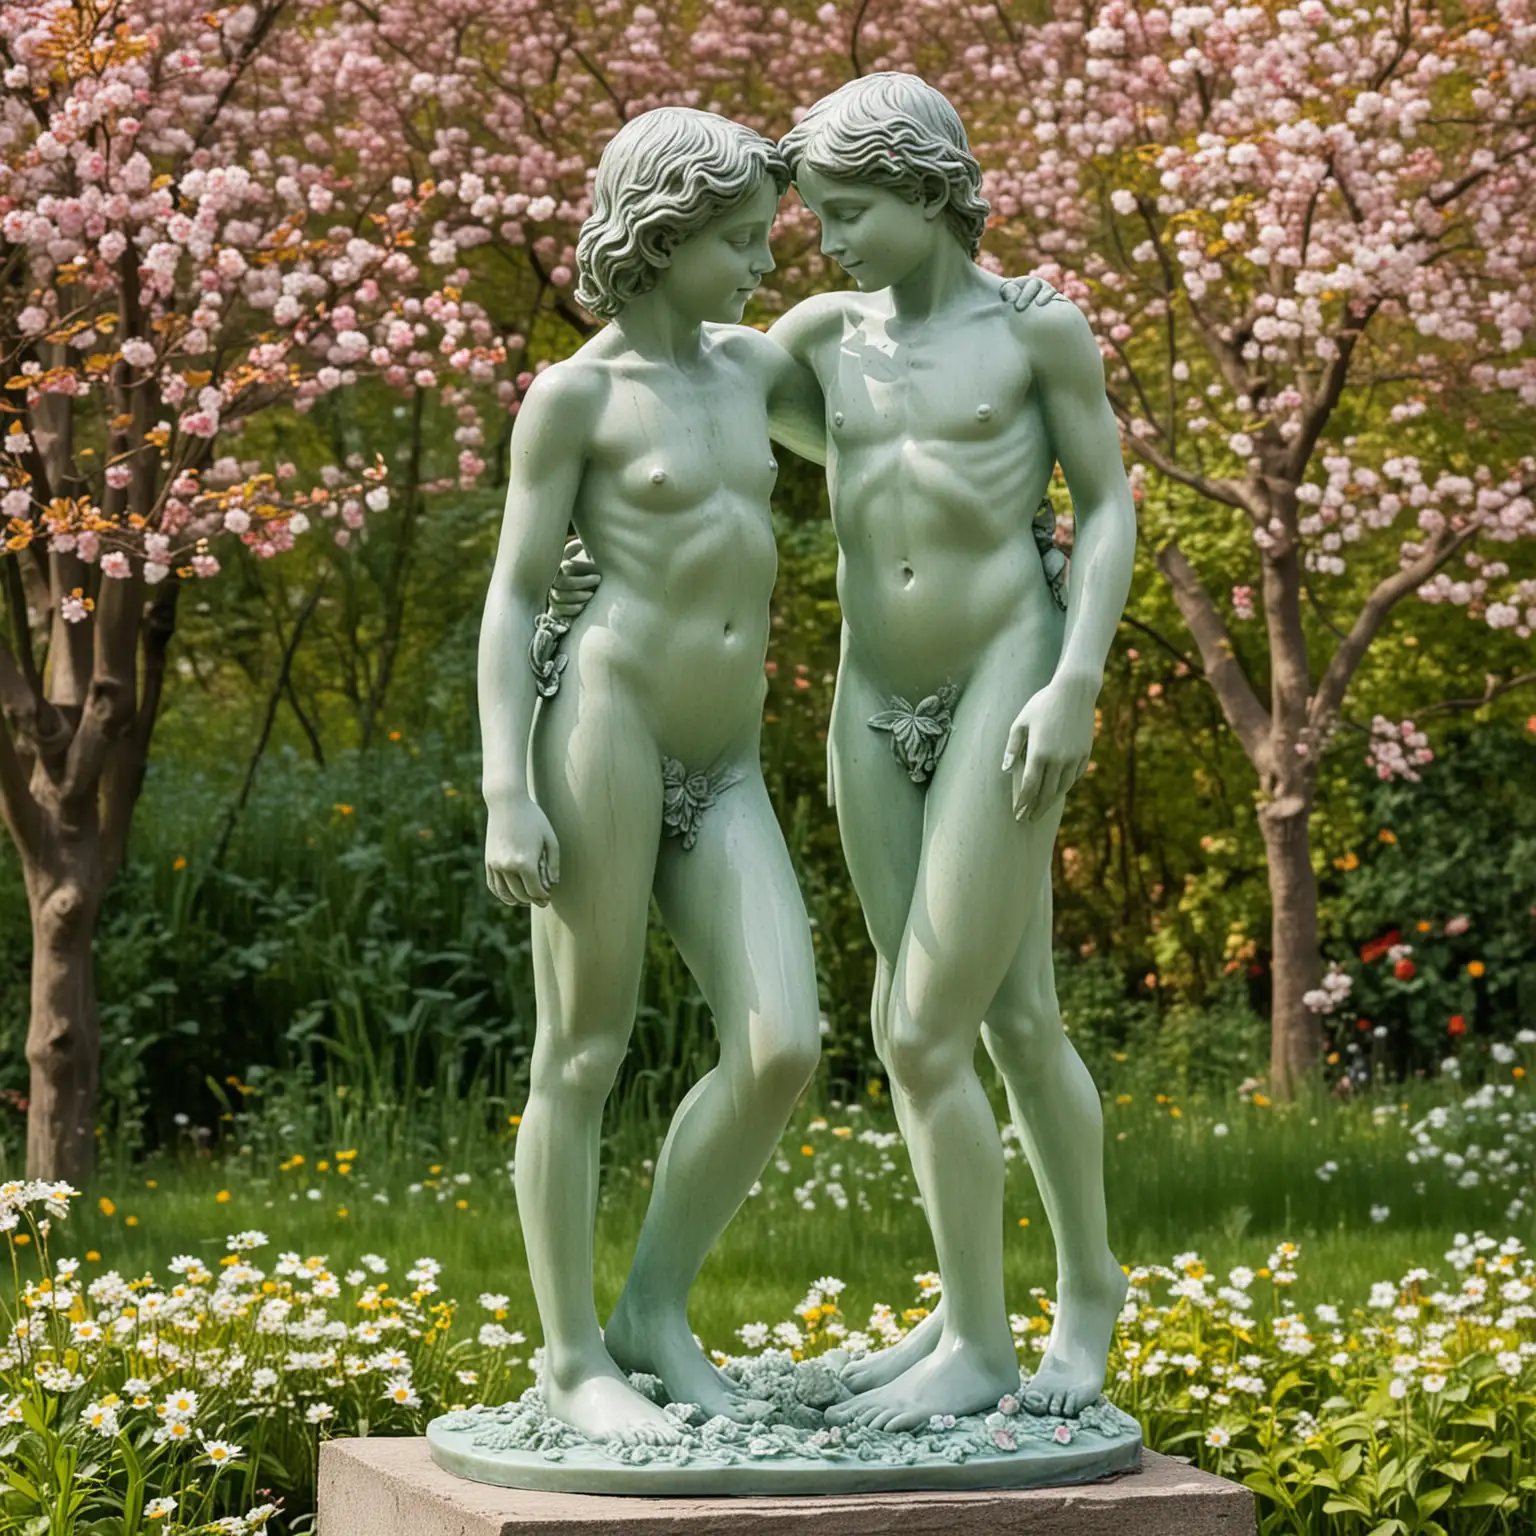 Naked Loving Couple Statue in Blossoming Garden